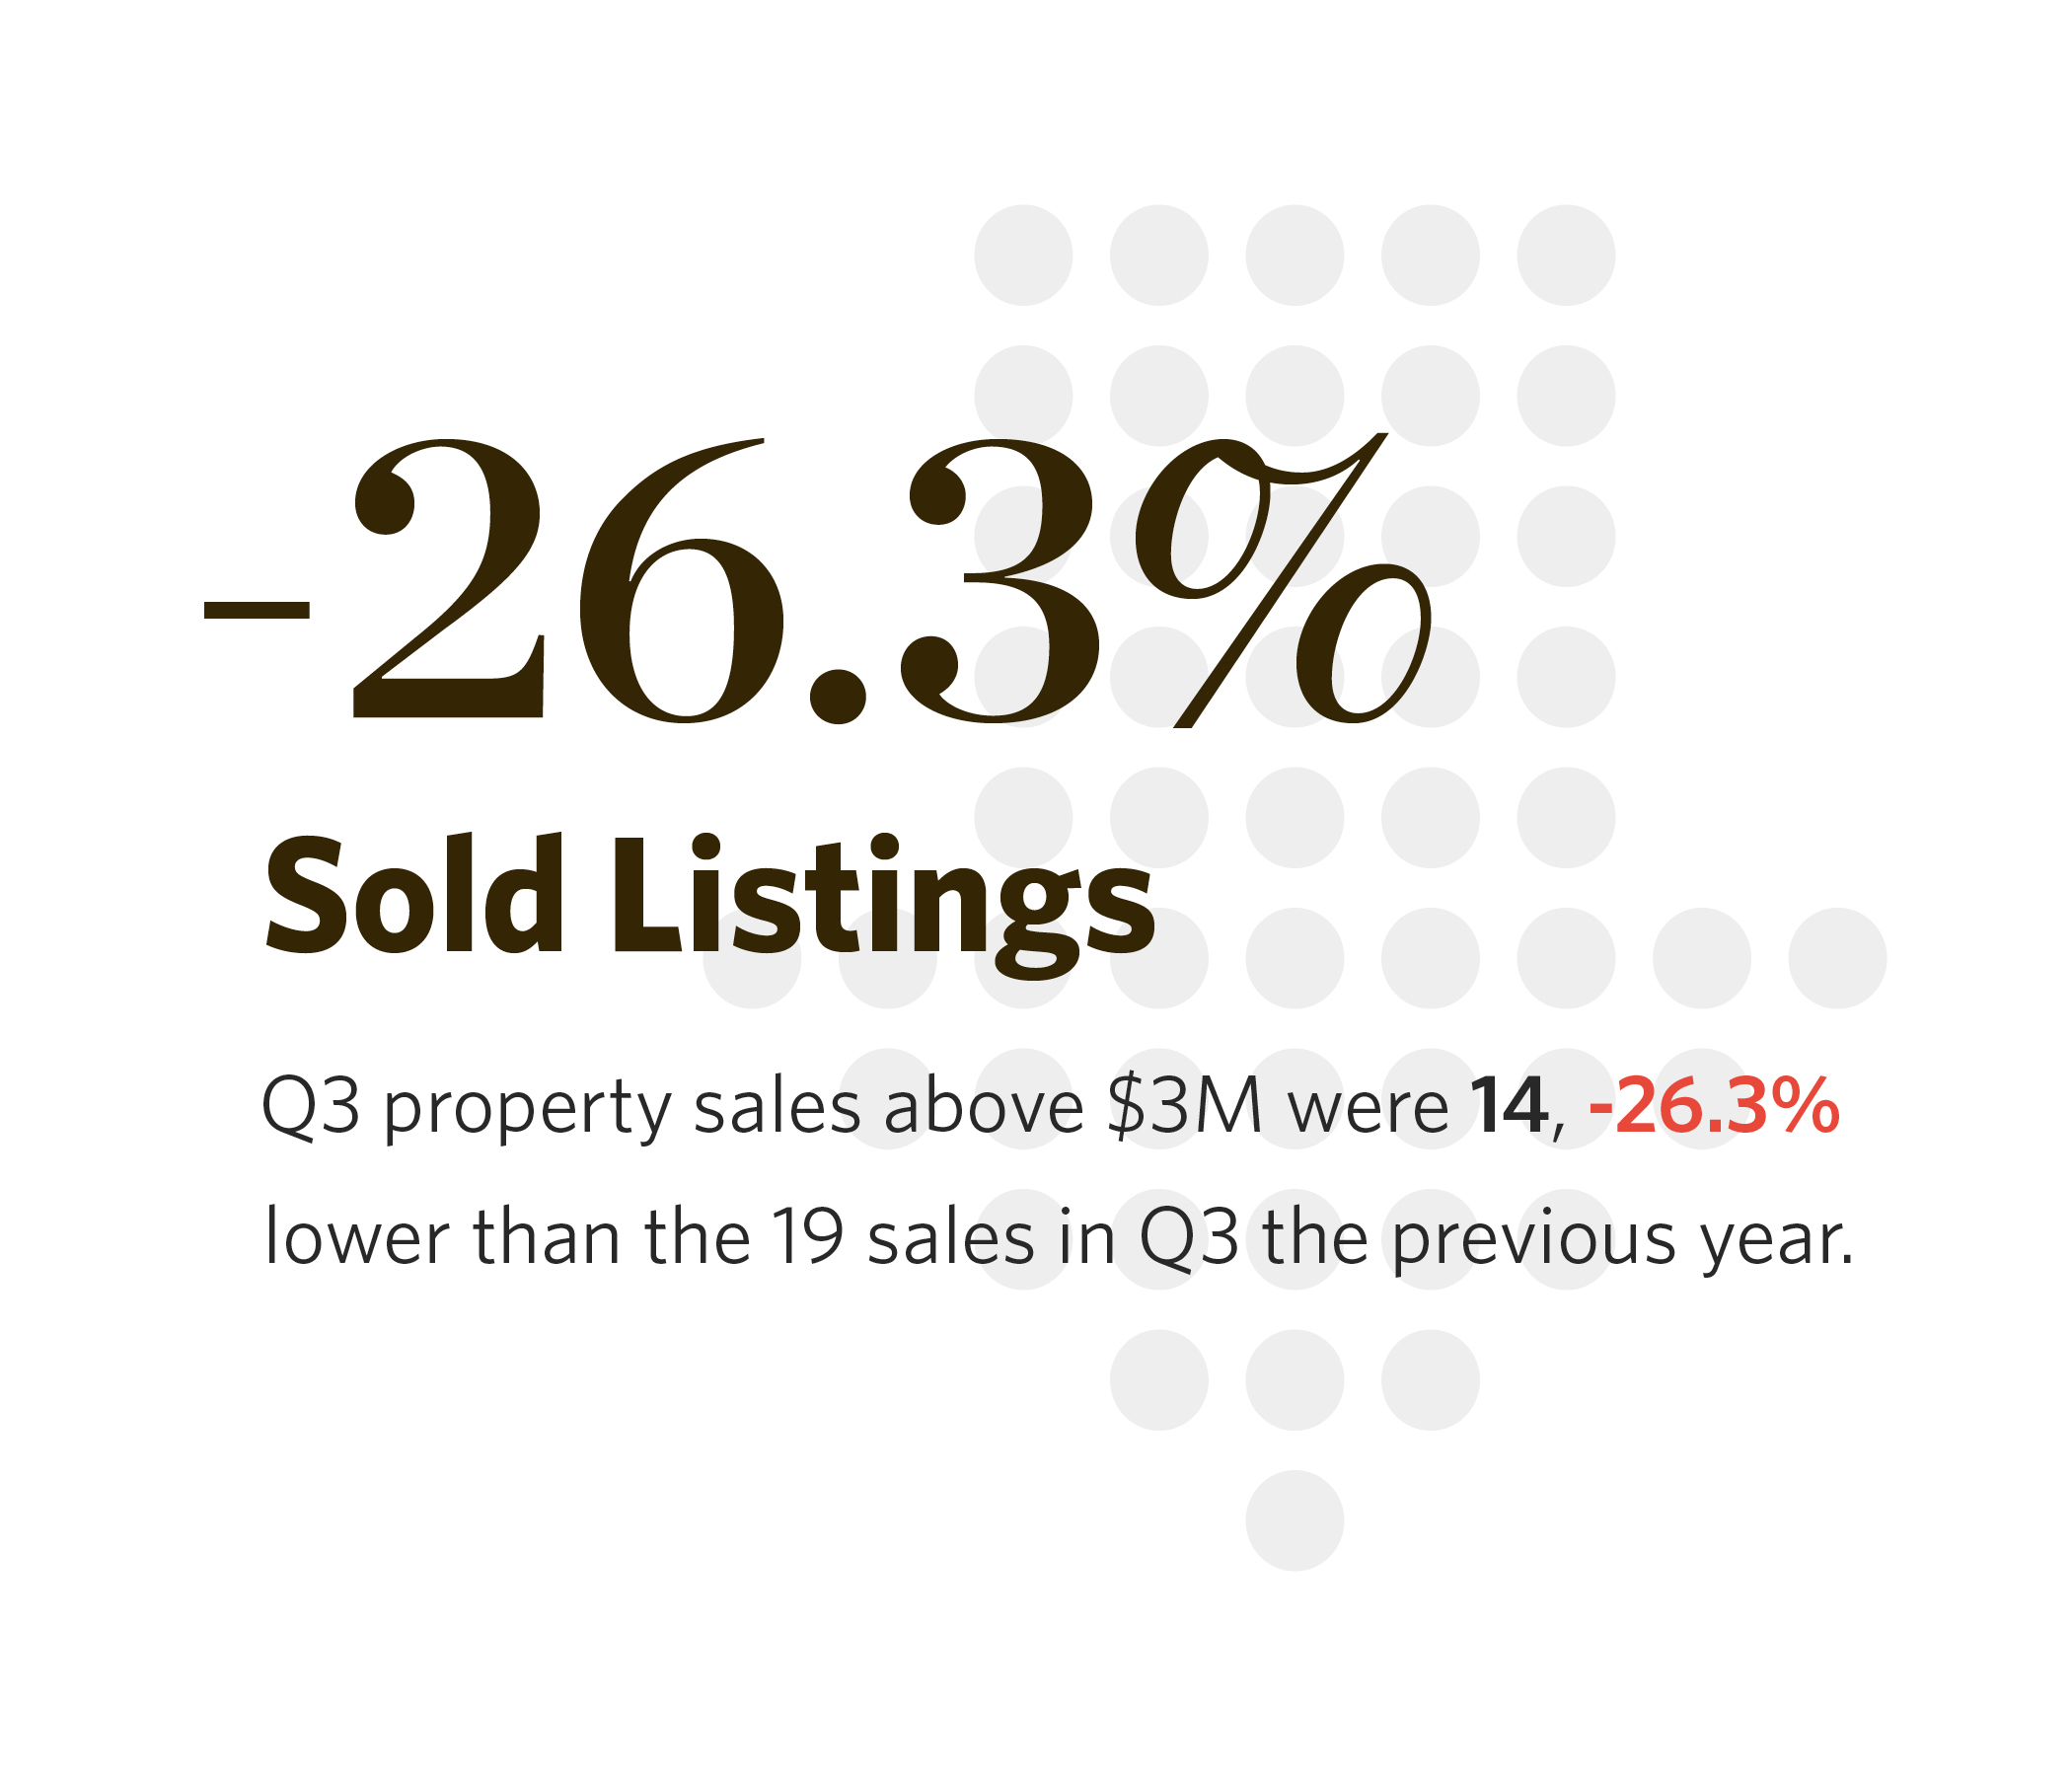 sold listings in hawaii down since the previous year